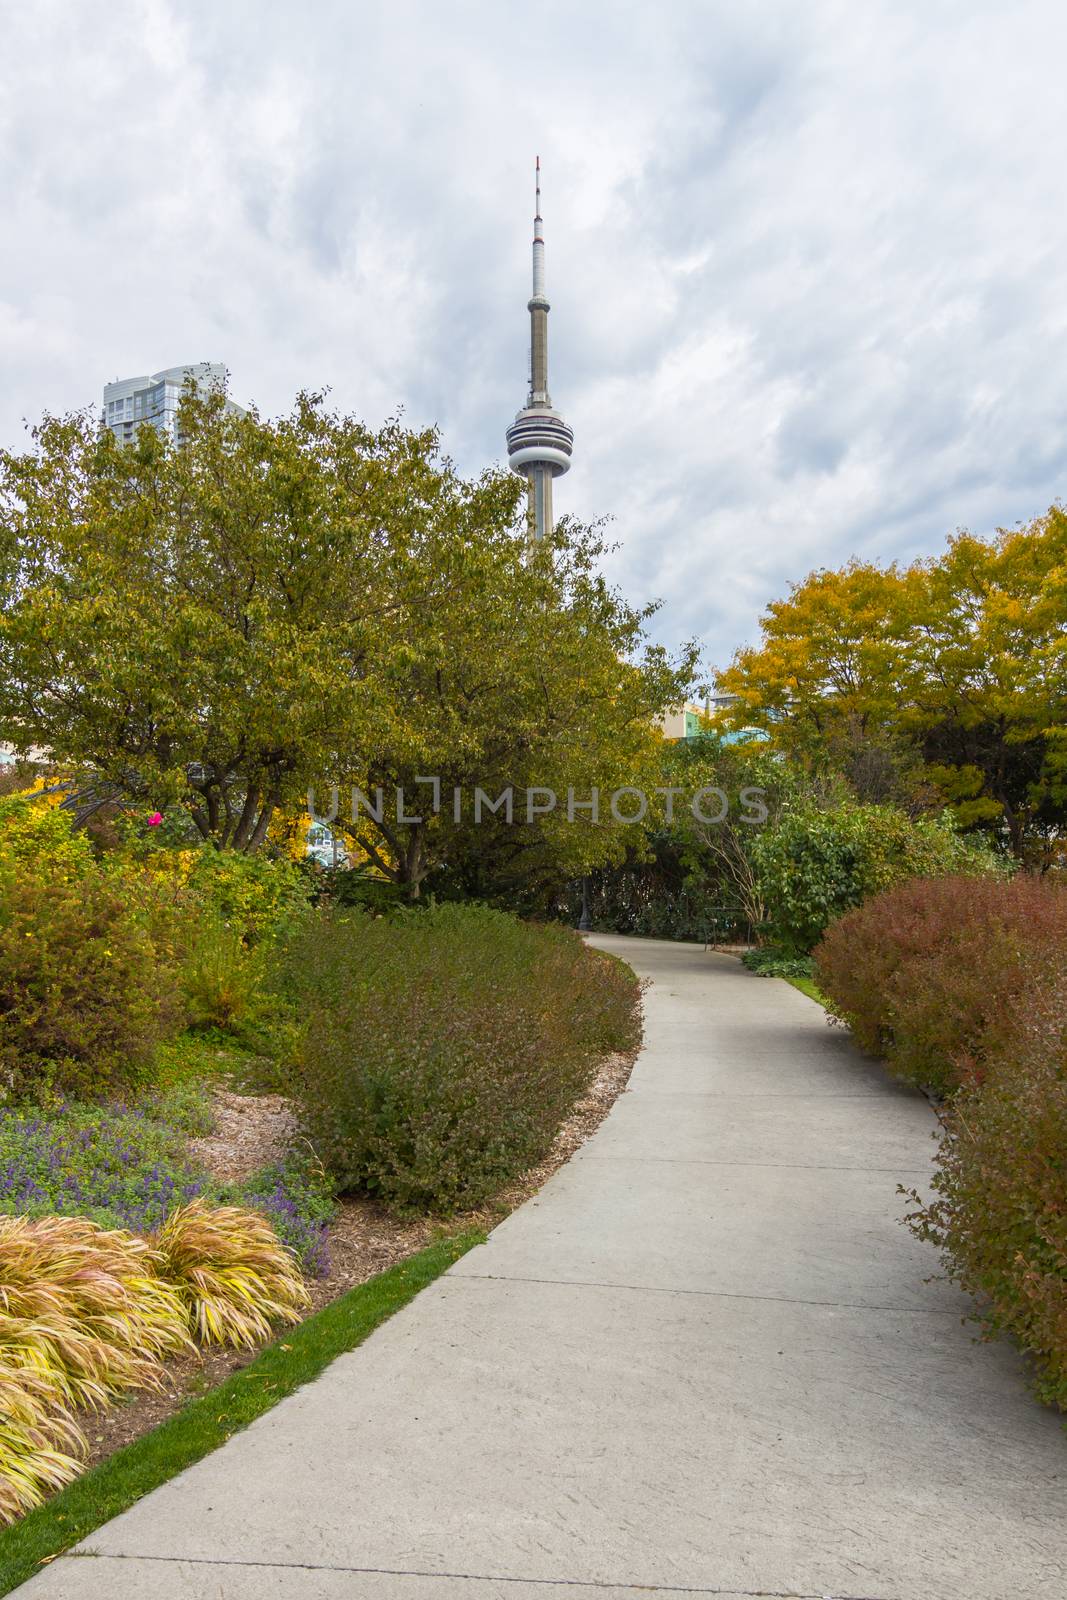 Toronto in autumn, Canada by anujakjaimook